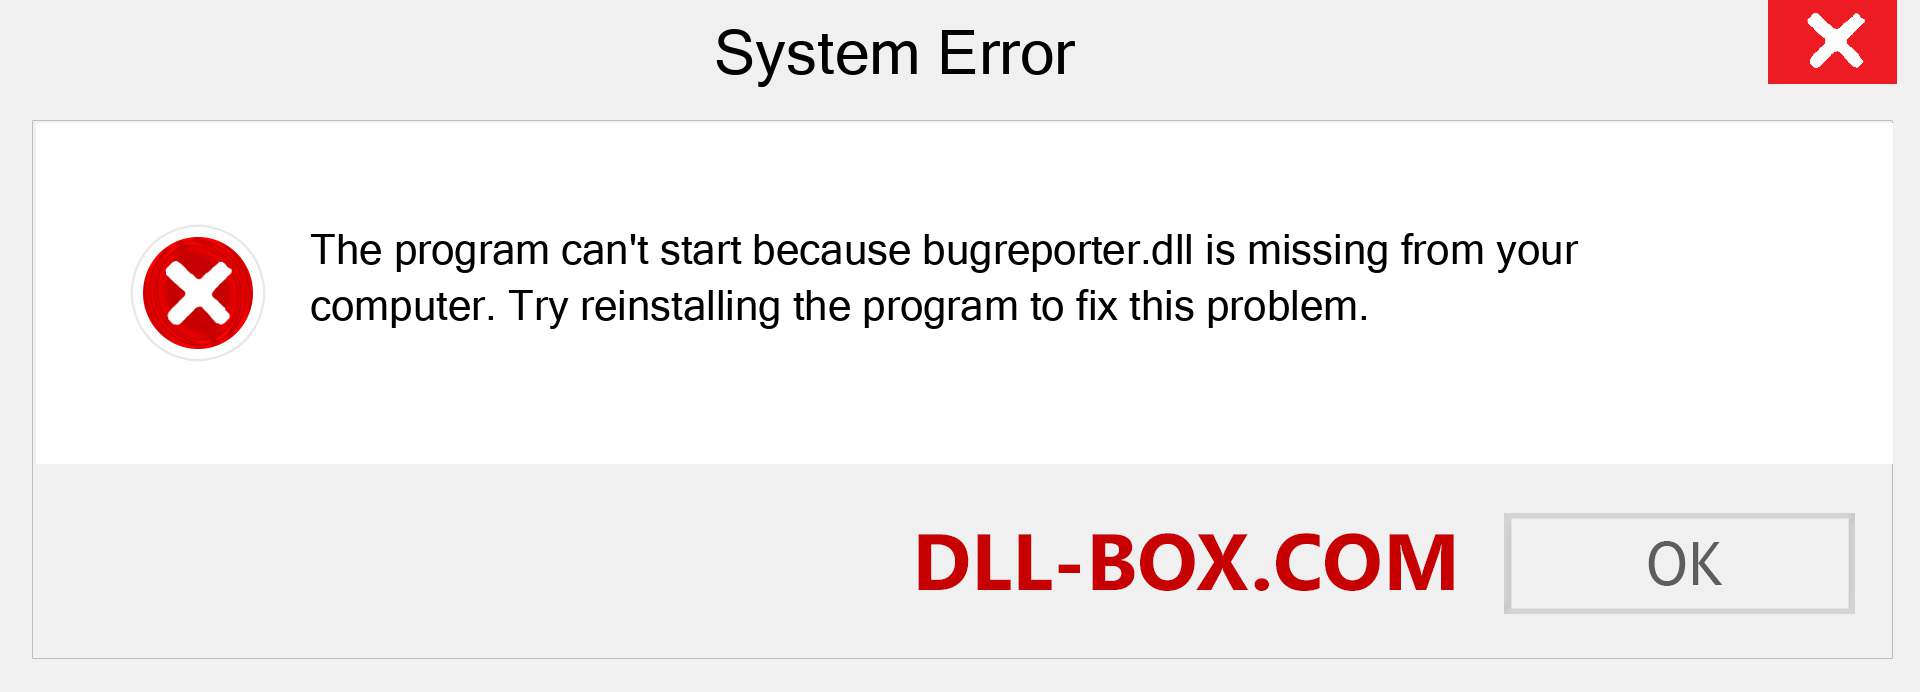  bugreporter.dll file is missing?. Download for Windows 7, 8, 10 - Fix  bugreporter dll Missing Error on Windows, photos, images